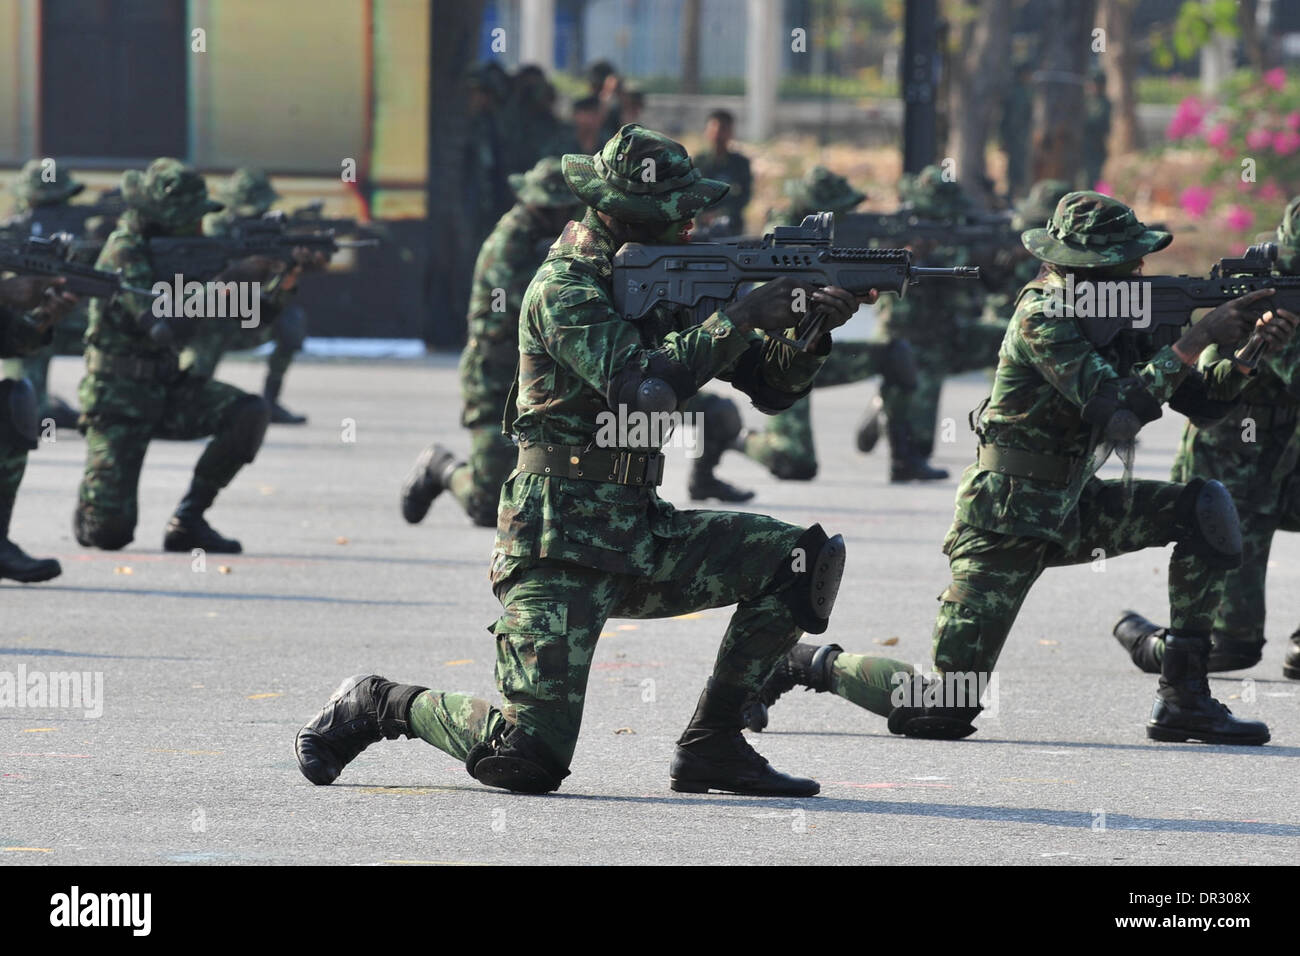 Bangkok, Thailand. 18th Jan, 2014. Thai soldiers participate in a training during celebrations of the Royal Thai Armed Forces Day at a military base in Bangkok, Thailand, Jan. 18, 2014. Credit:  Rachen Sageamsak/Xinhua/Alamy Live News Stock Photo